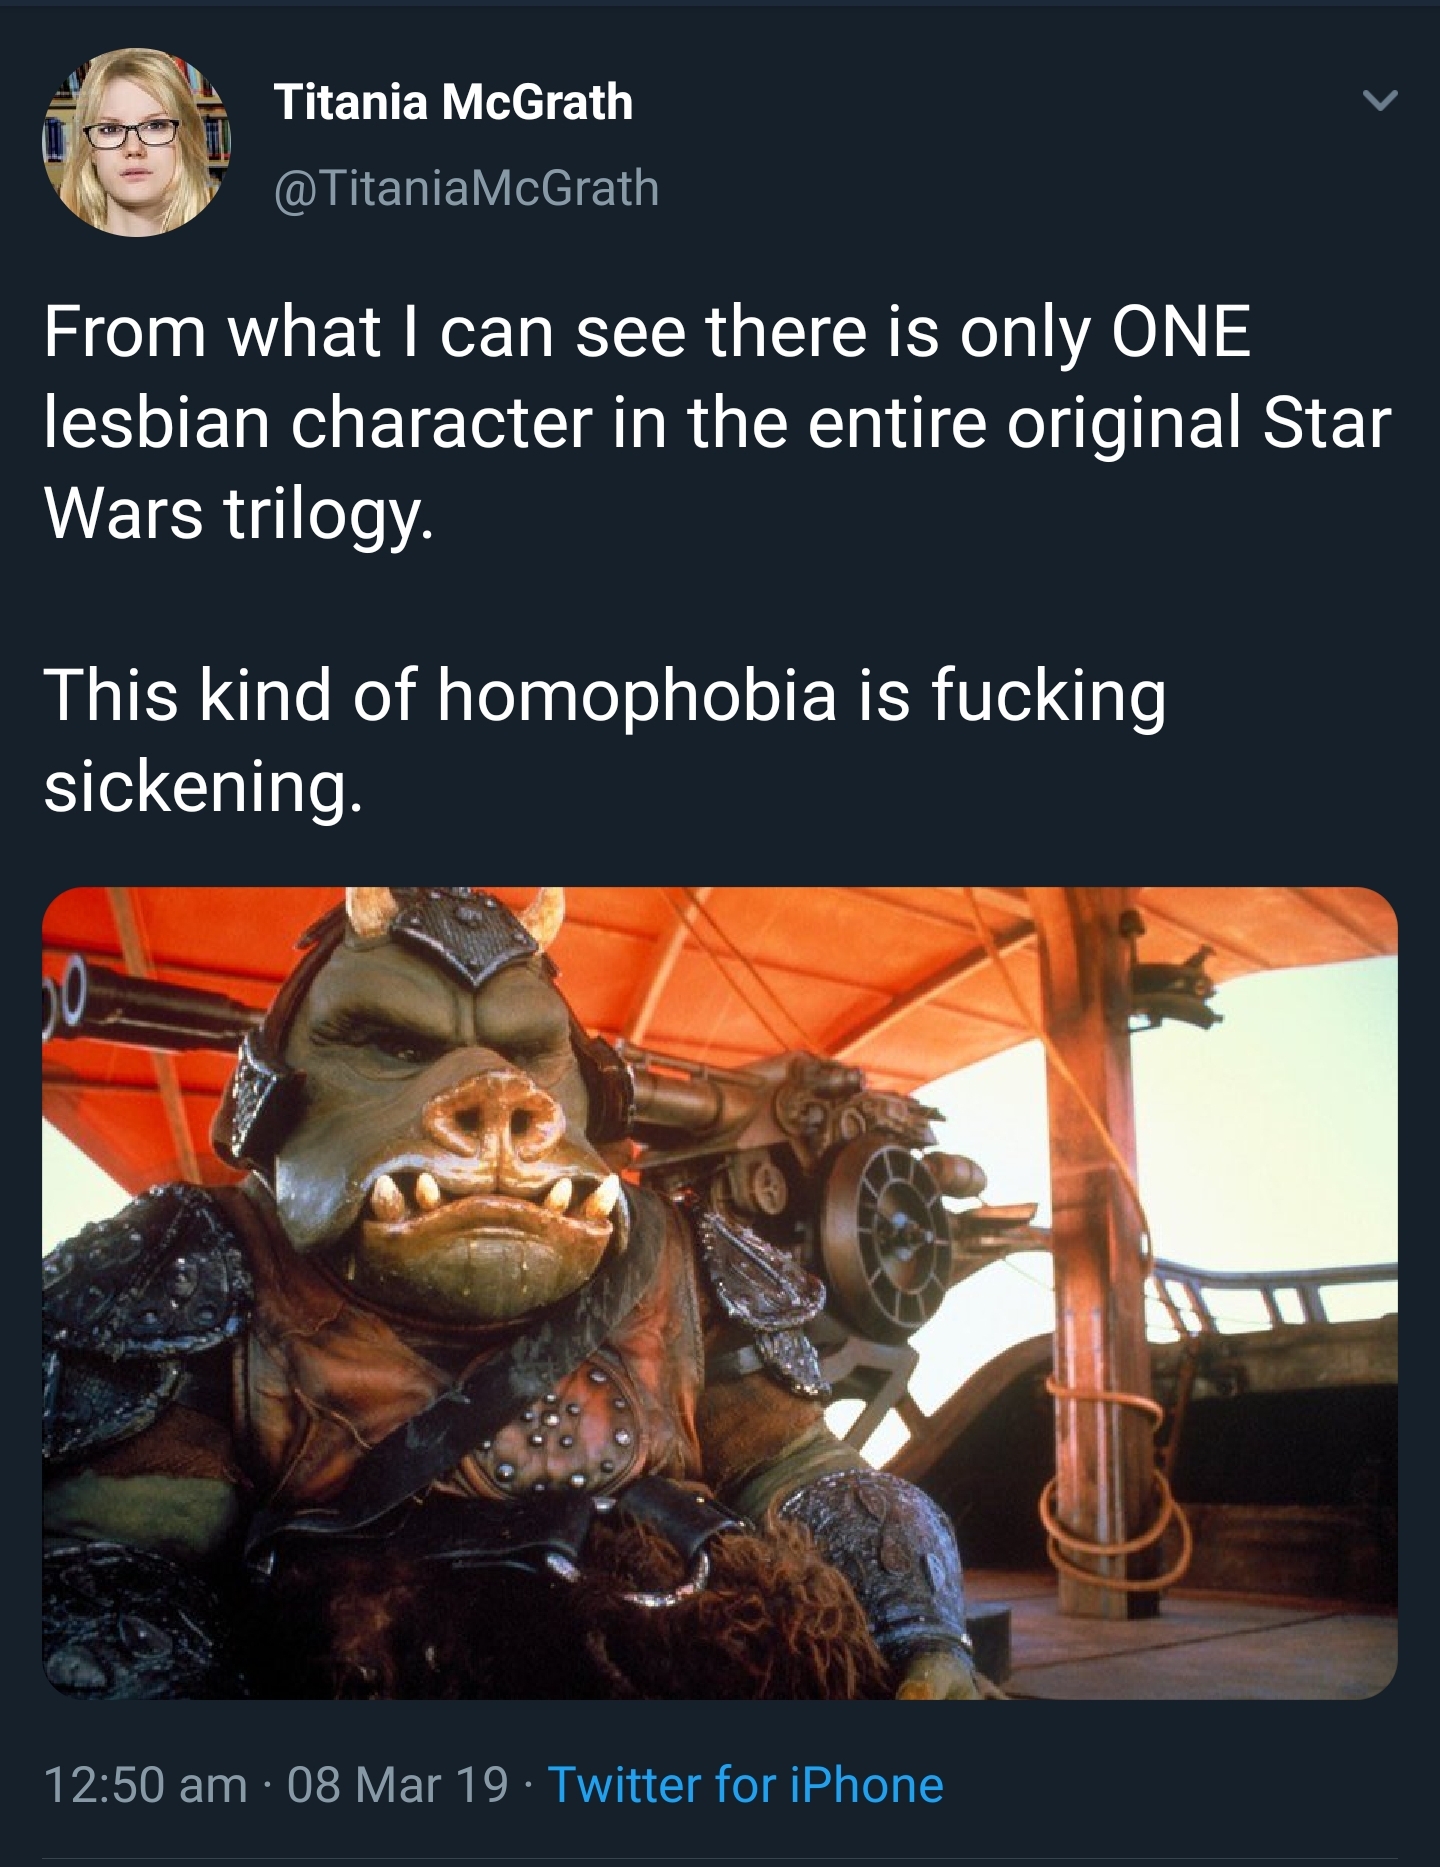 star wars gamorrean guard - Titania McGrath McGrath From what I can see there is only One lesbian character in the entire original Star Wars trilogy. This kind of homophobia is fucking sickening. 08 Mar 19 Twitter for iPhone